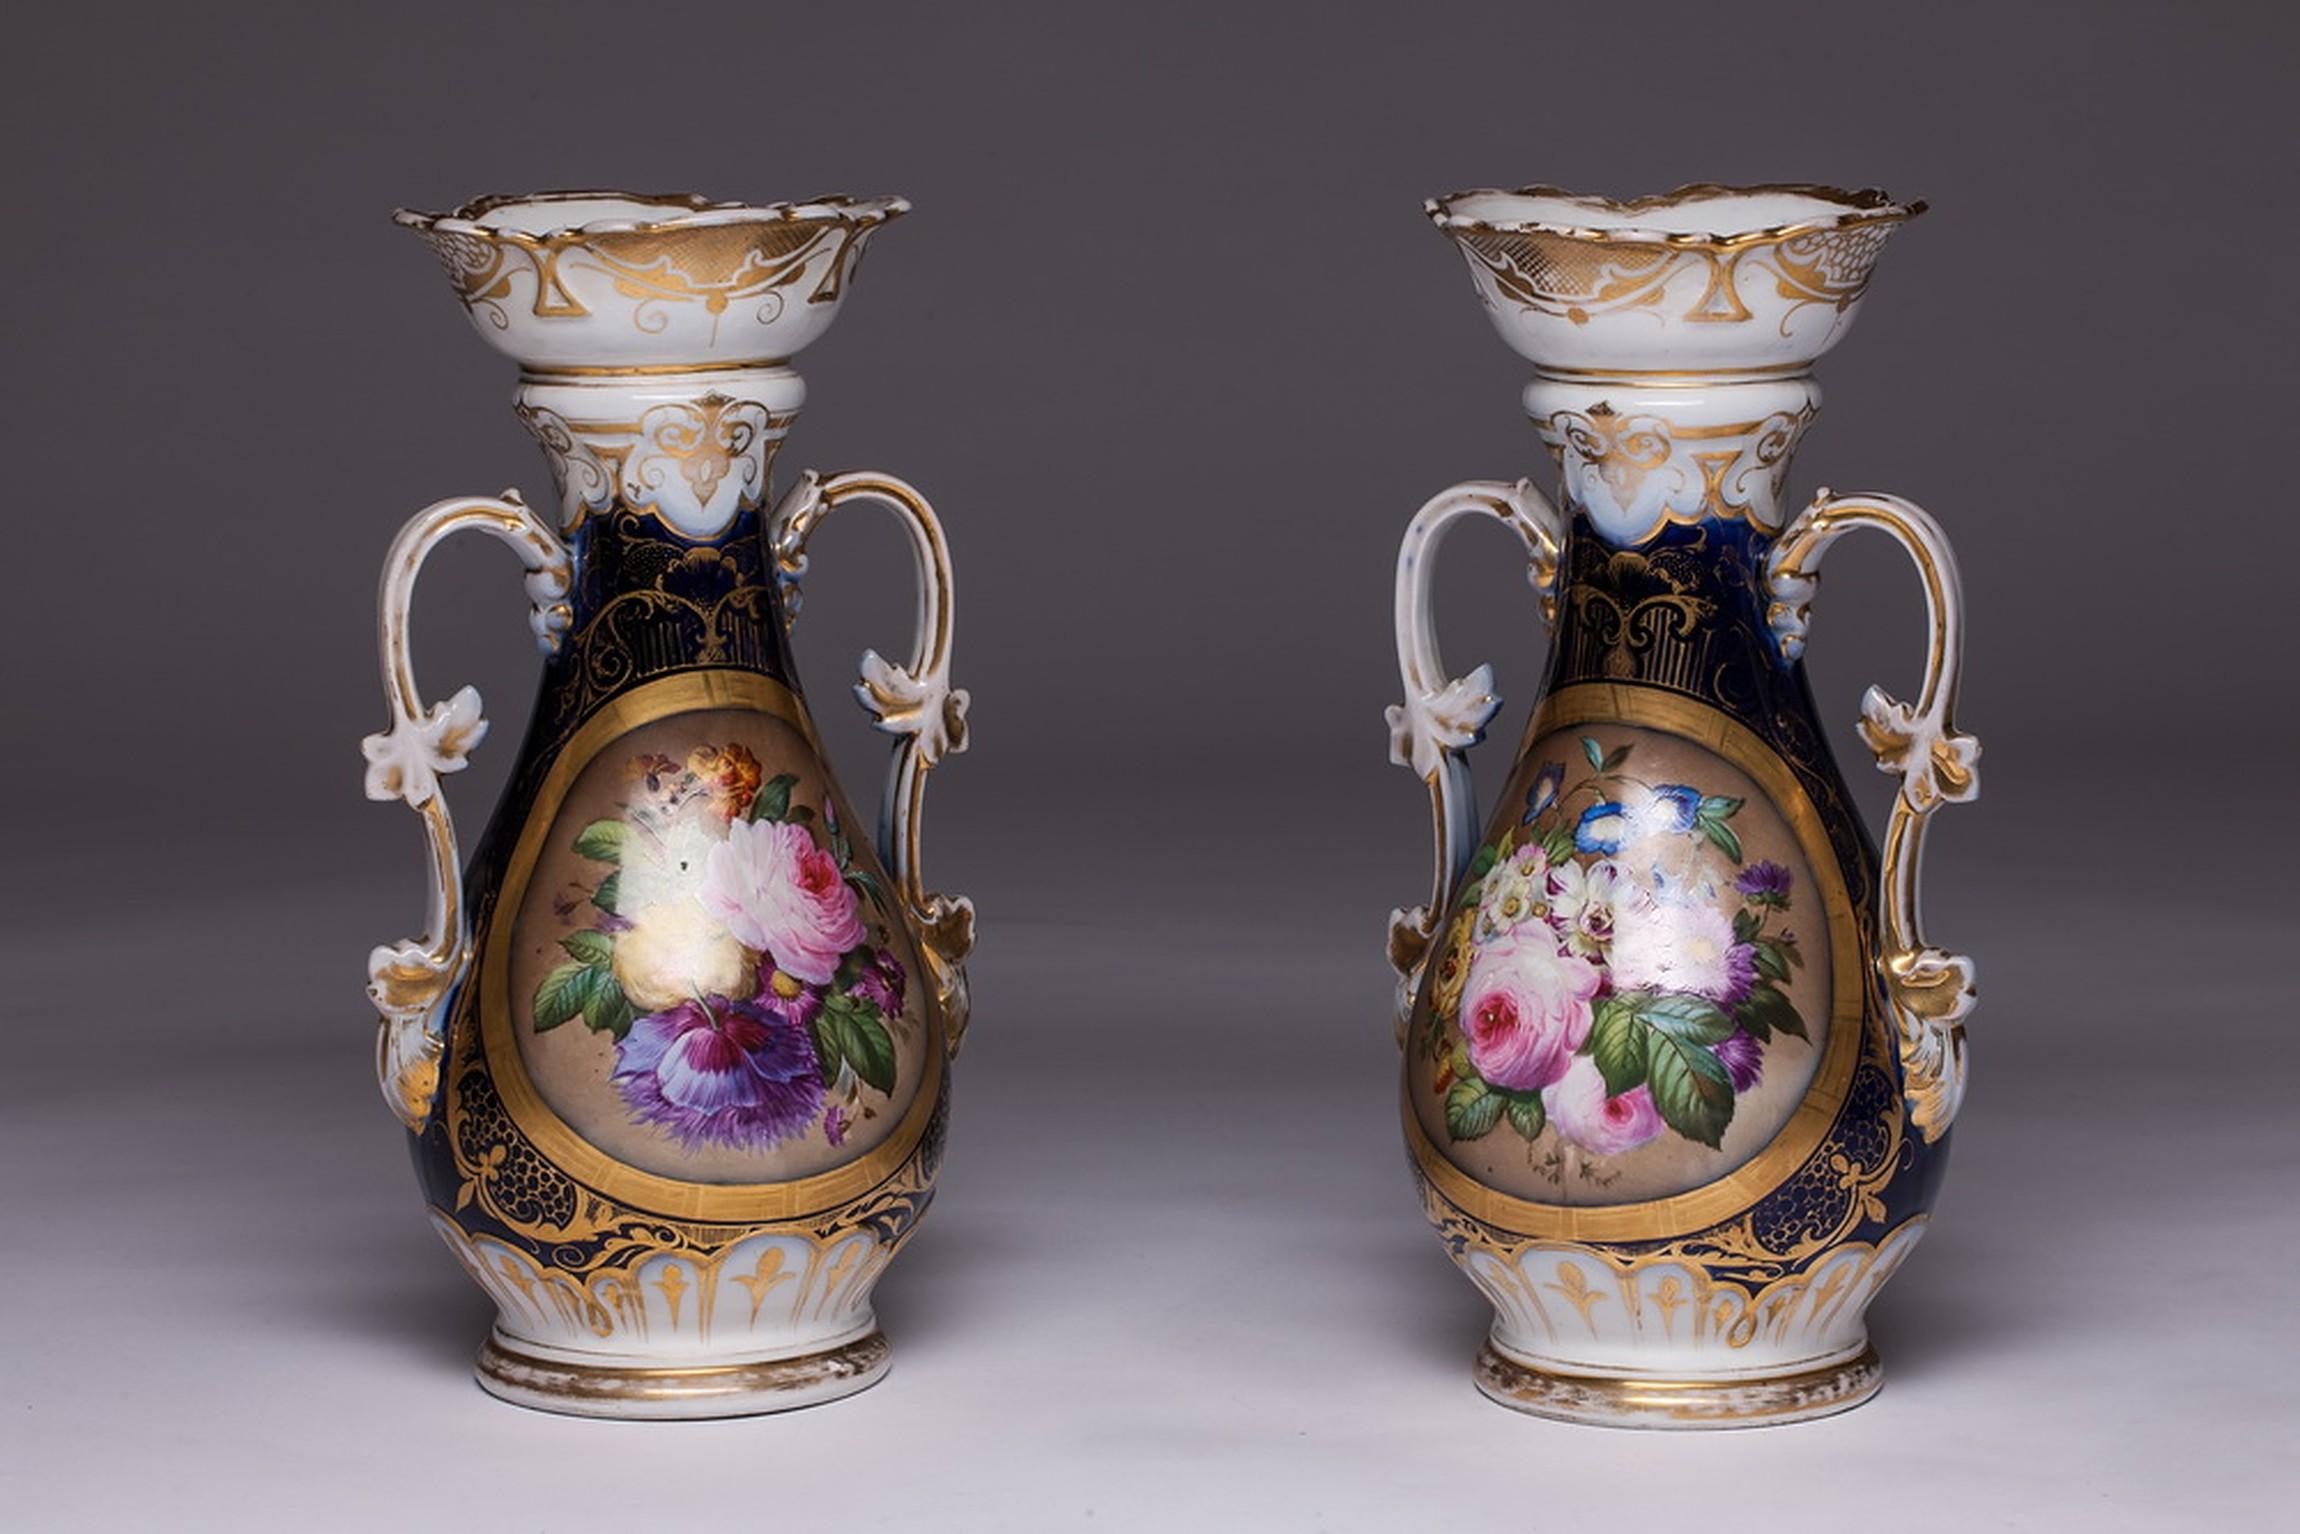 Pair of French Vieux Old Paris vases with handles. Hand painted with 2 floral oval motives in cobalt blue color and gold application.